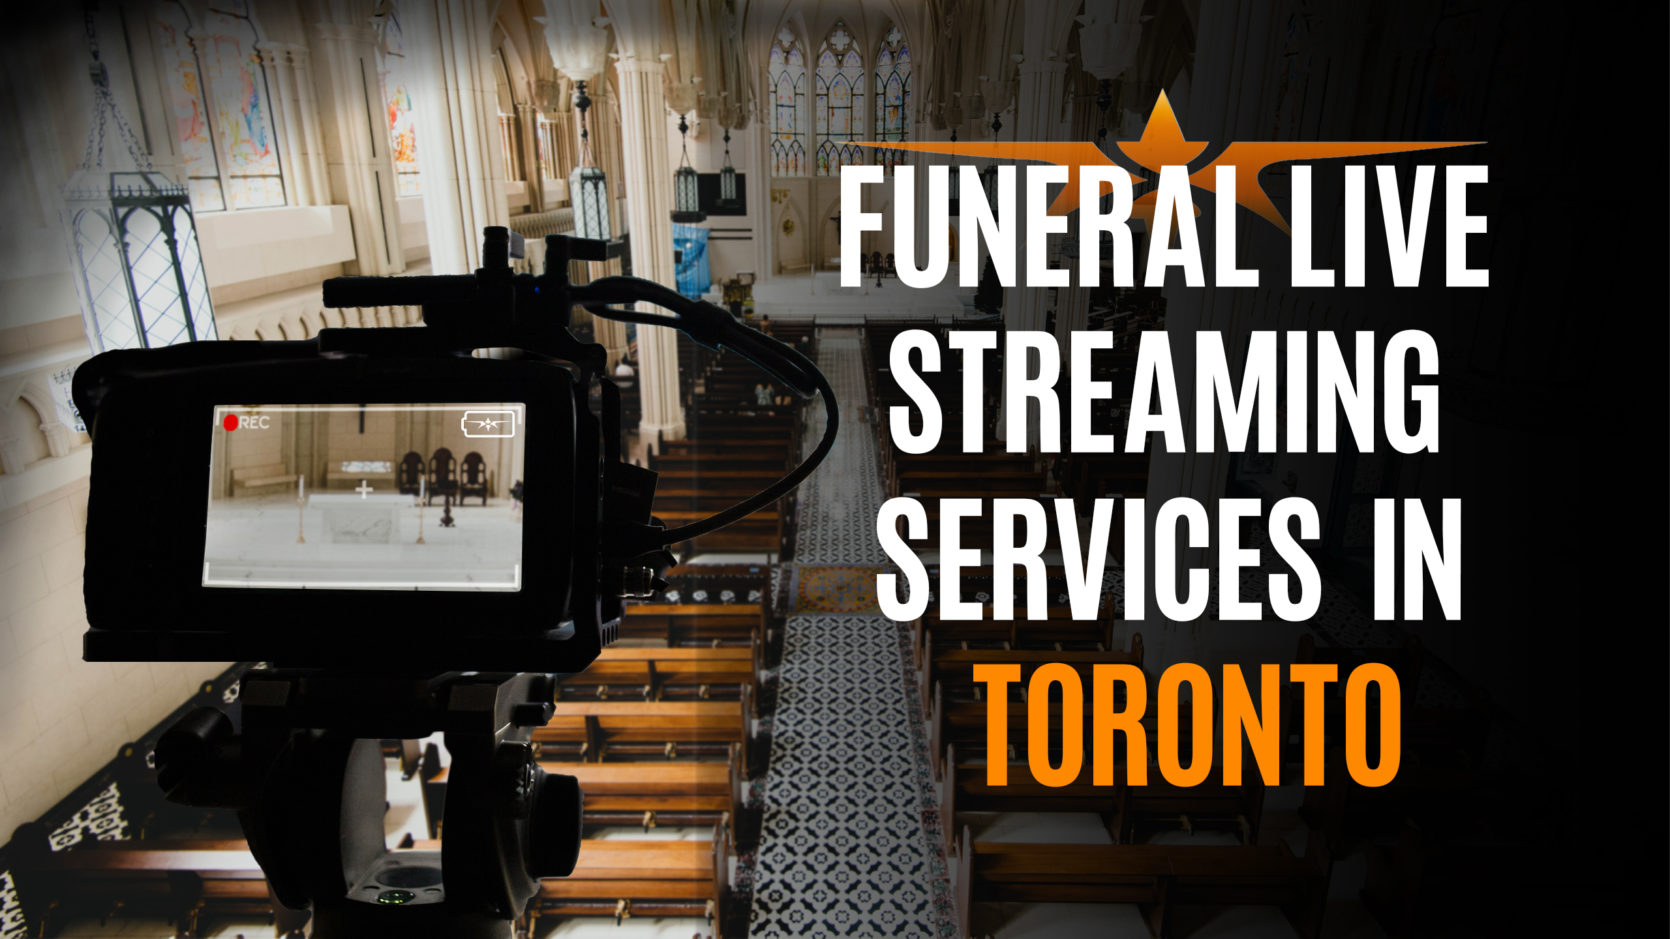 Funeral Live Streaming Services in Toronto